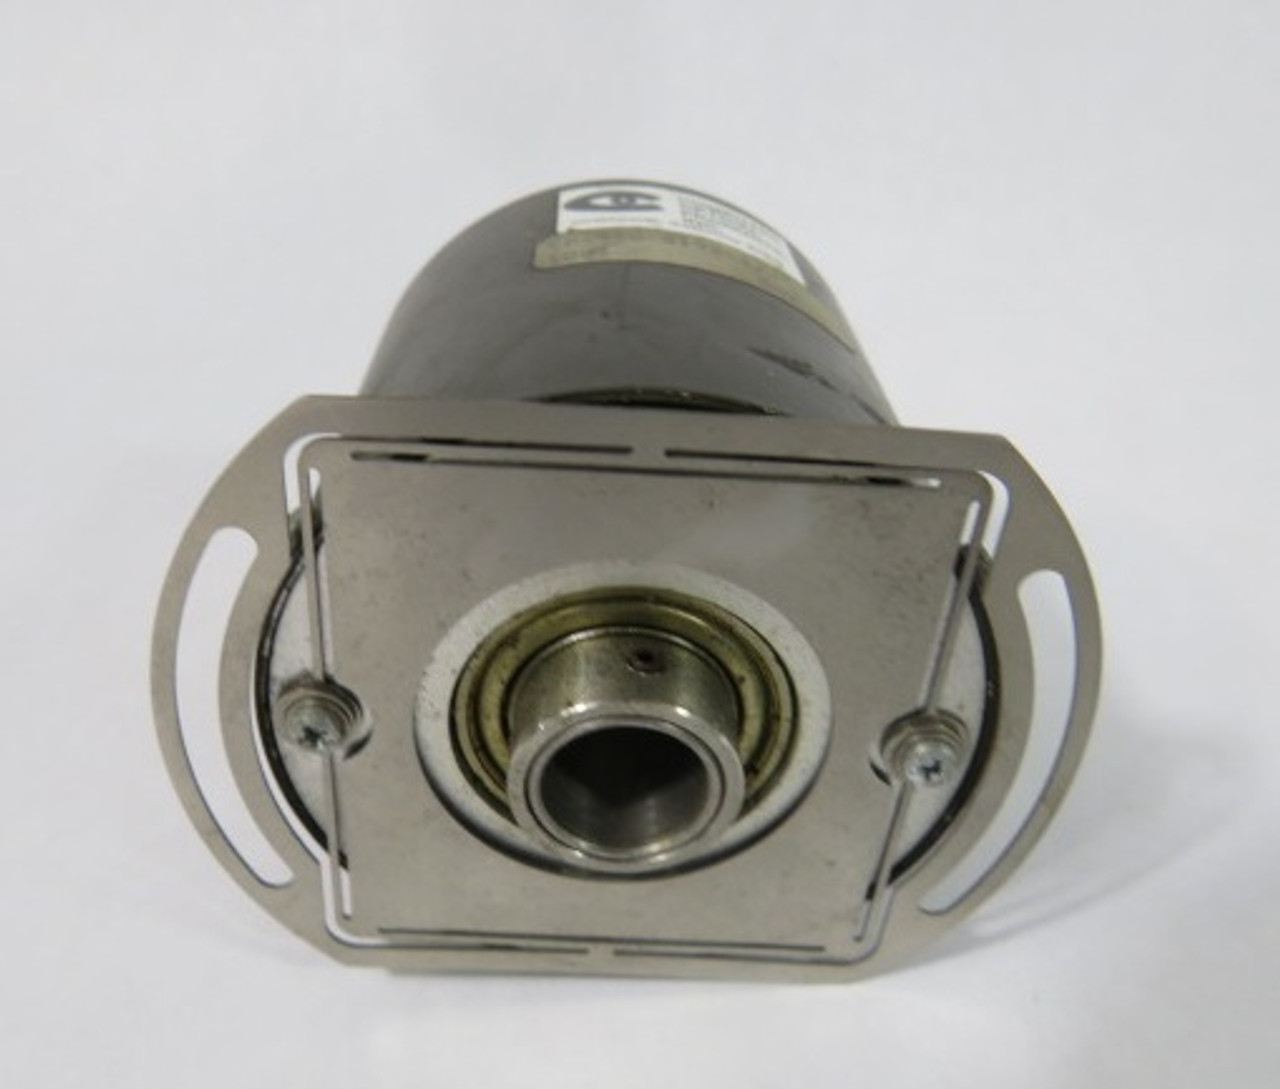 Computer Optical Products CP-950-8192-1/2" Encoder 1/2" Connection USED